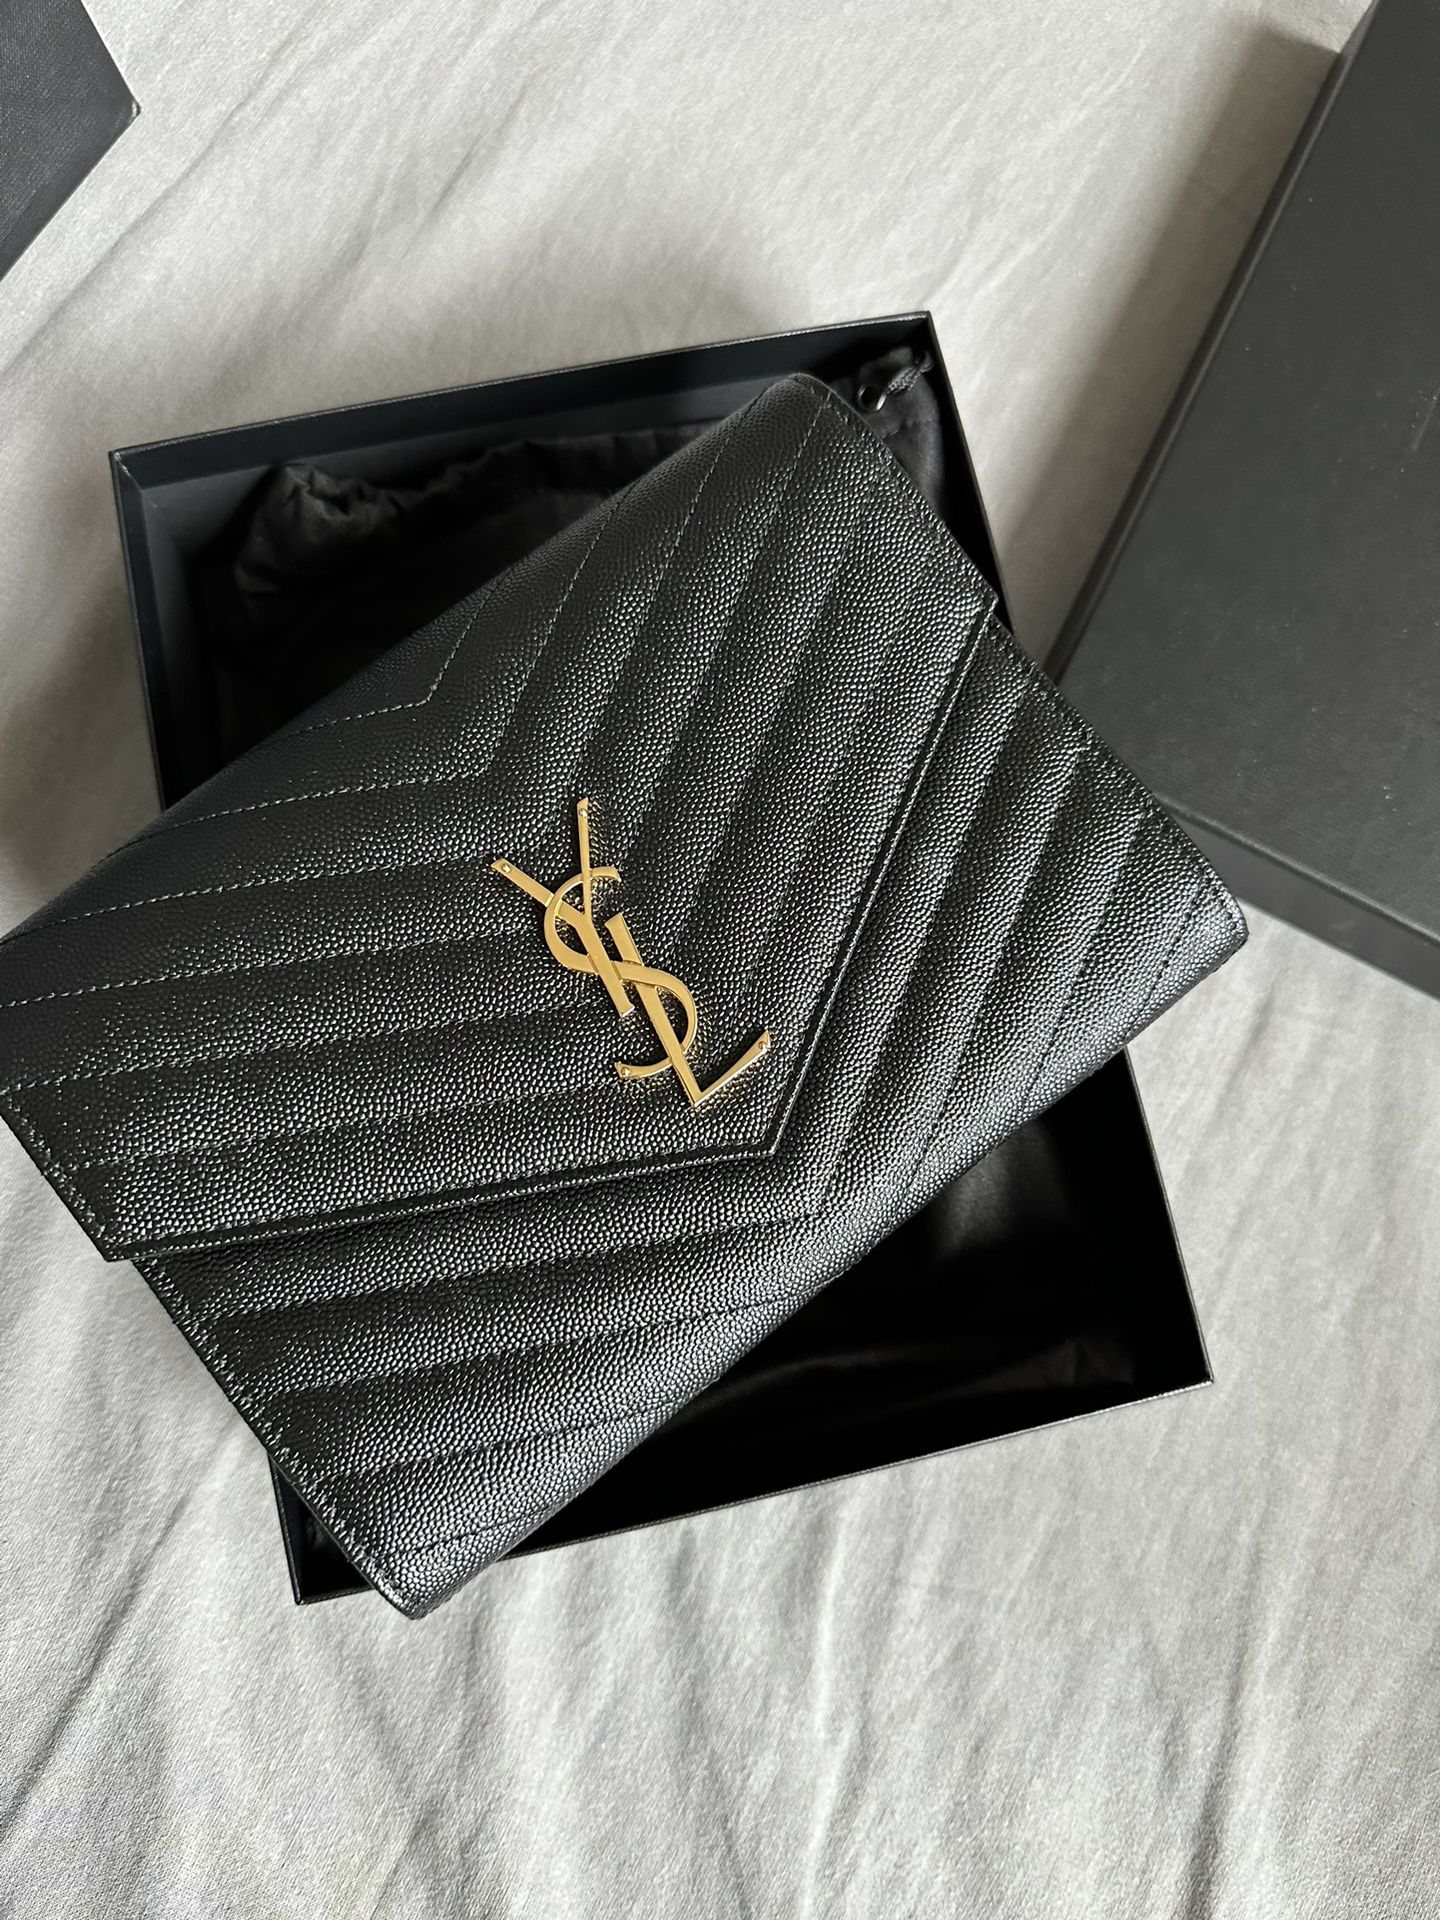 Yves Saint Laurent Clutch for Sale in North Brunswick Township, NJ